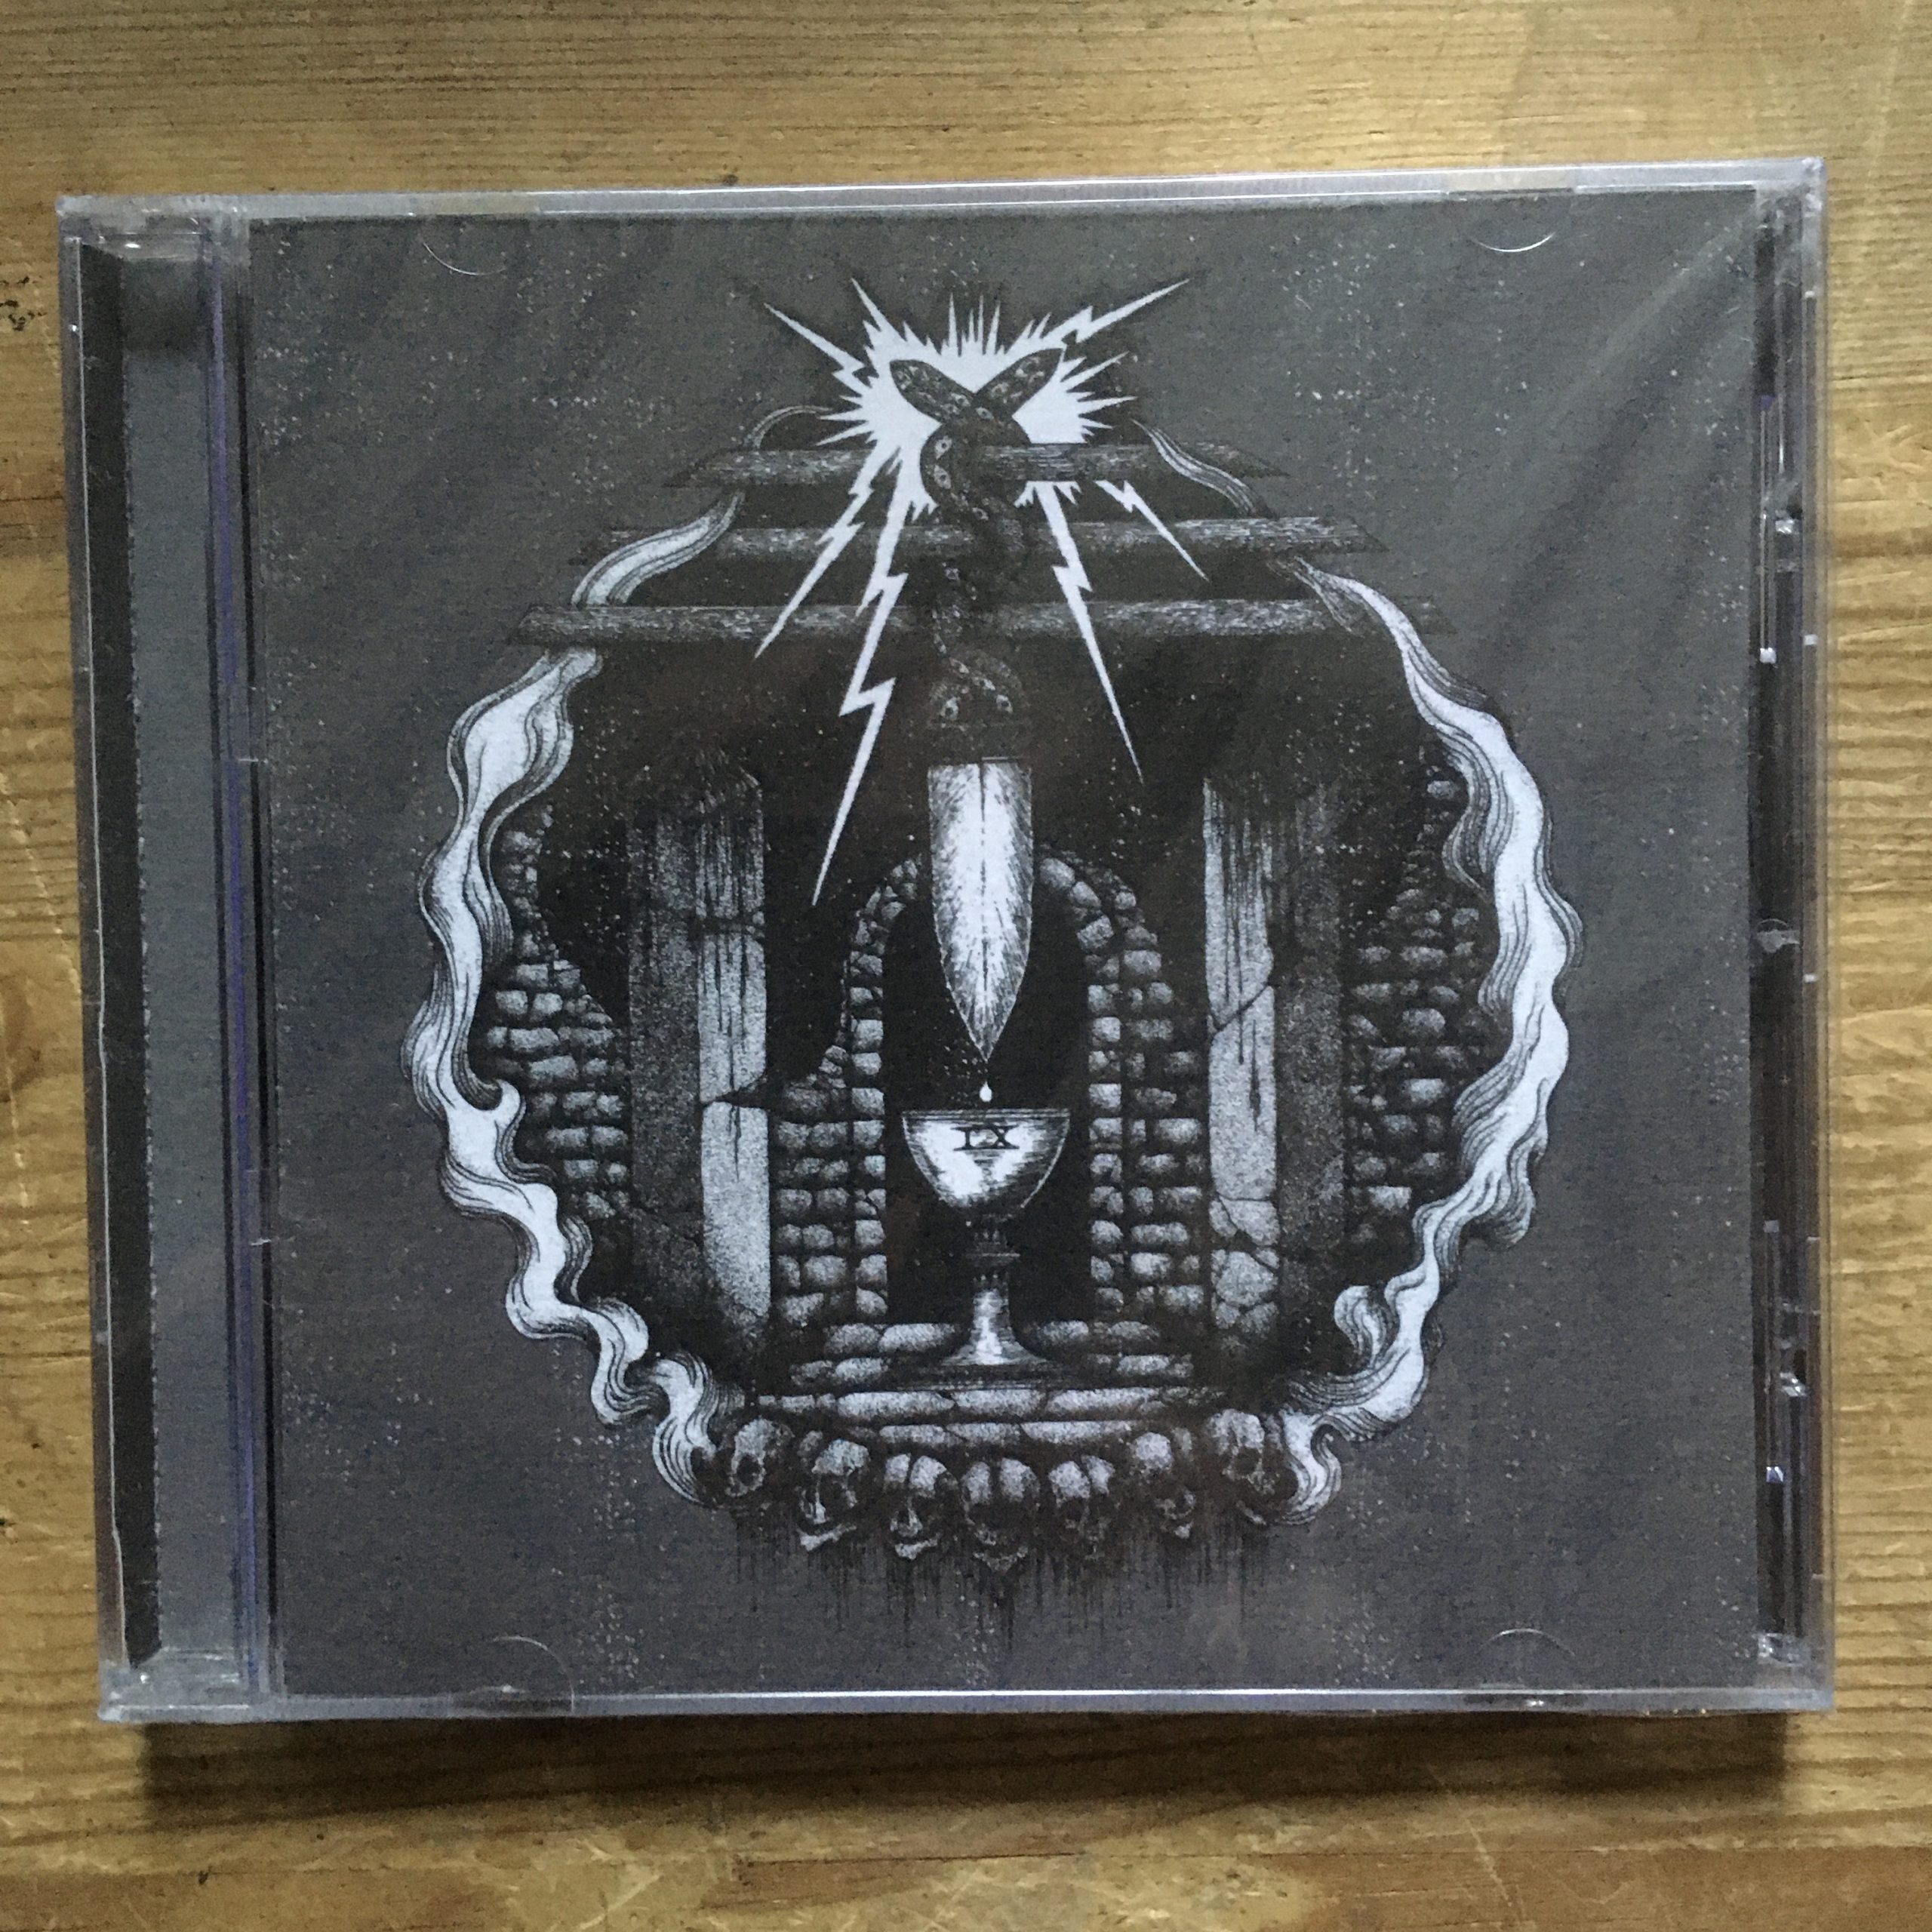 Photo of the Corpsessed - "The Dagger & The Chalice" CD